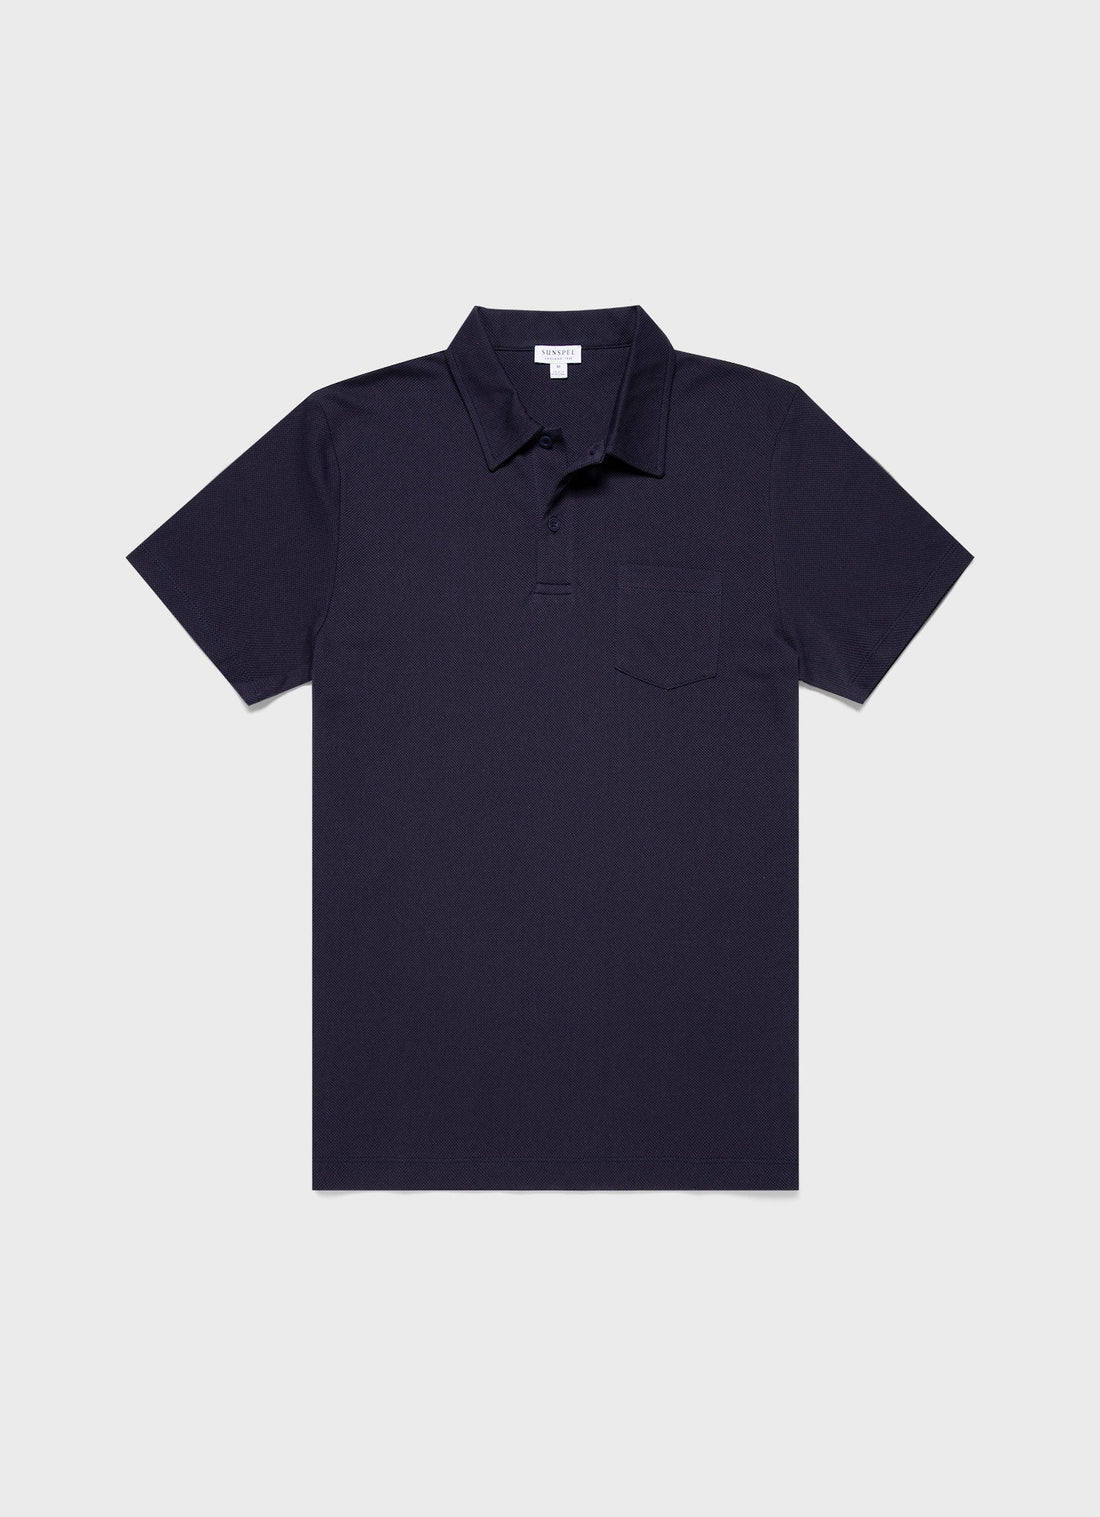 Men's Polo Shirts, Knit Polos + Rugby Shirts